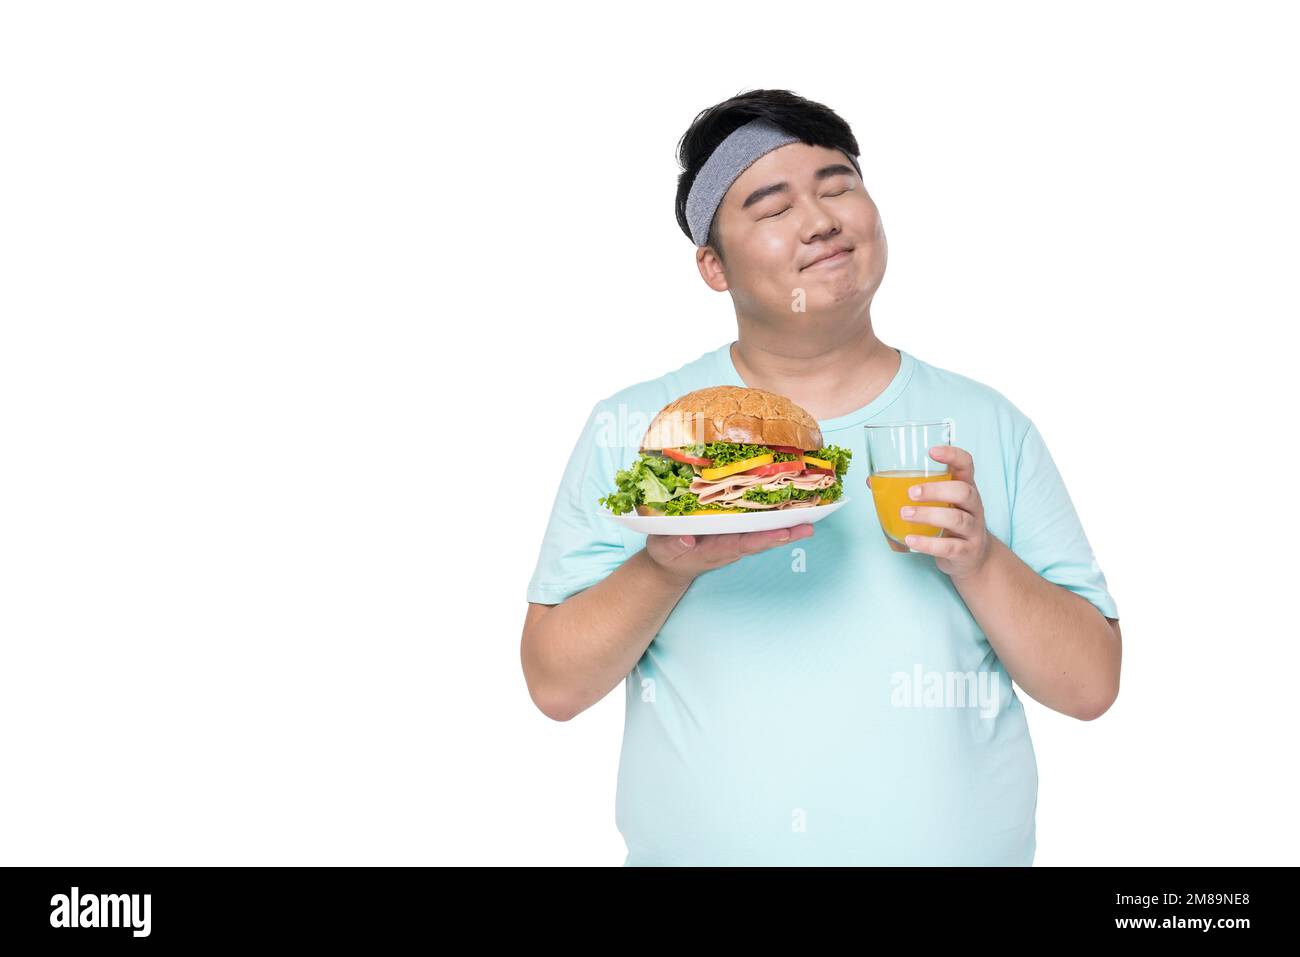 Fat young man holding a hamburger and drinks Stock Photo